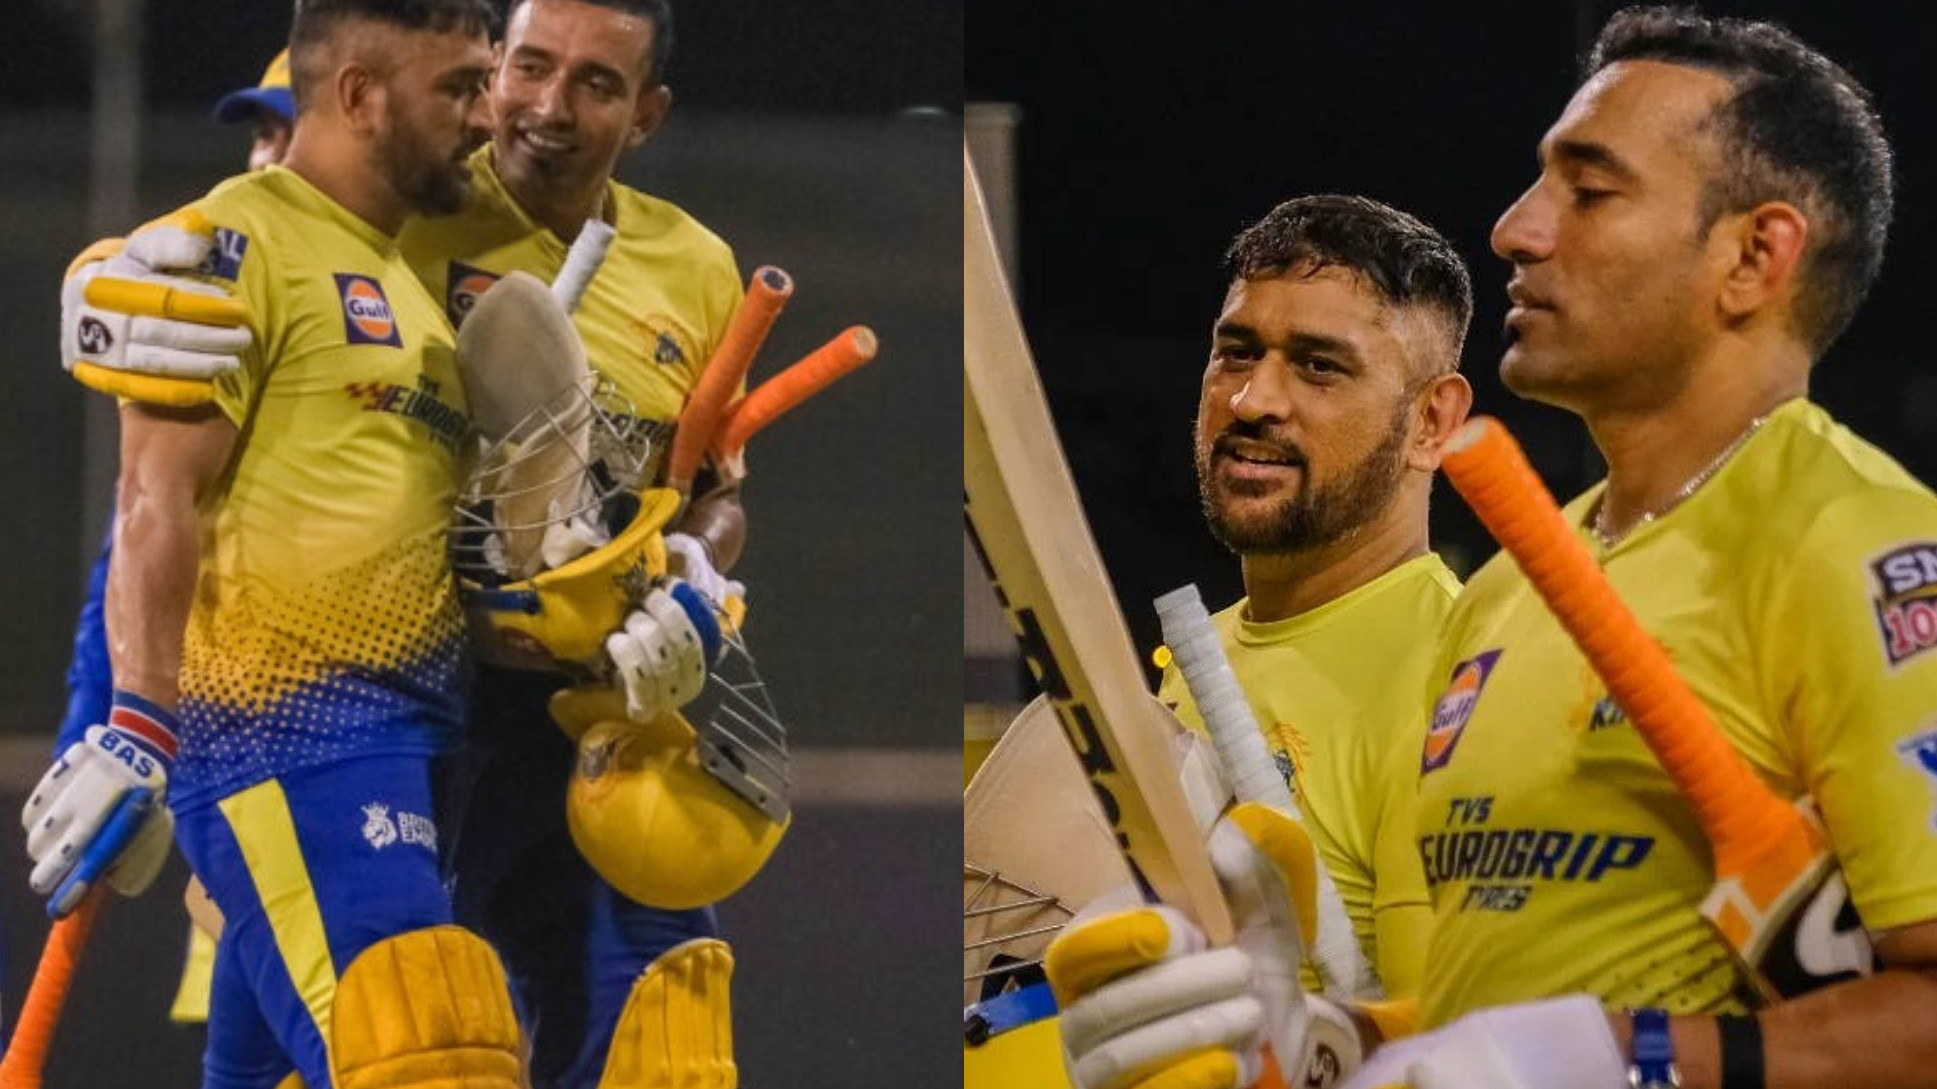 Robin Uthappa reveals being impressed by MS Dhoni's unchanged humble nature on joining CSK in 2021